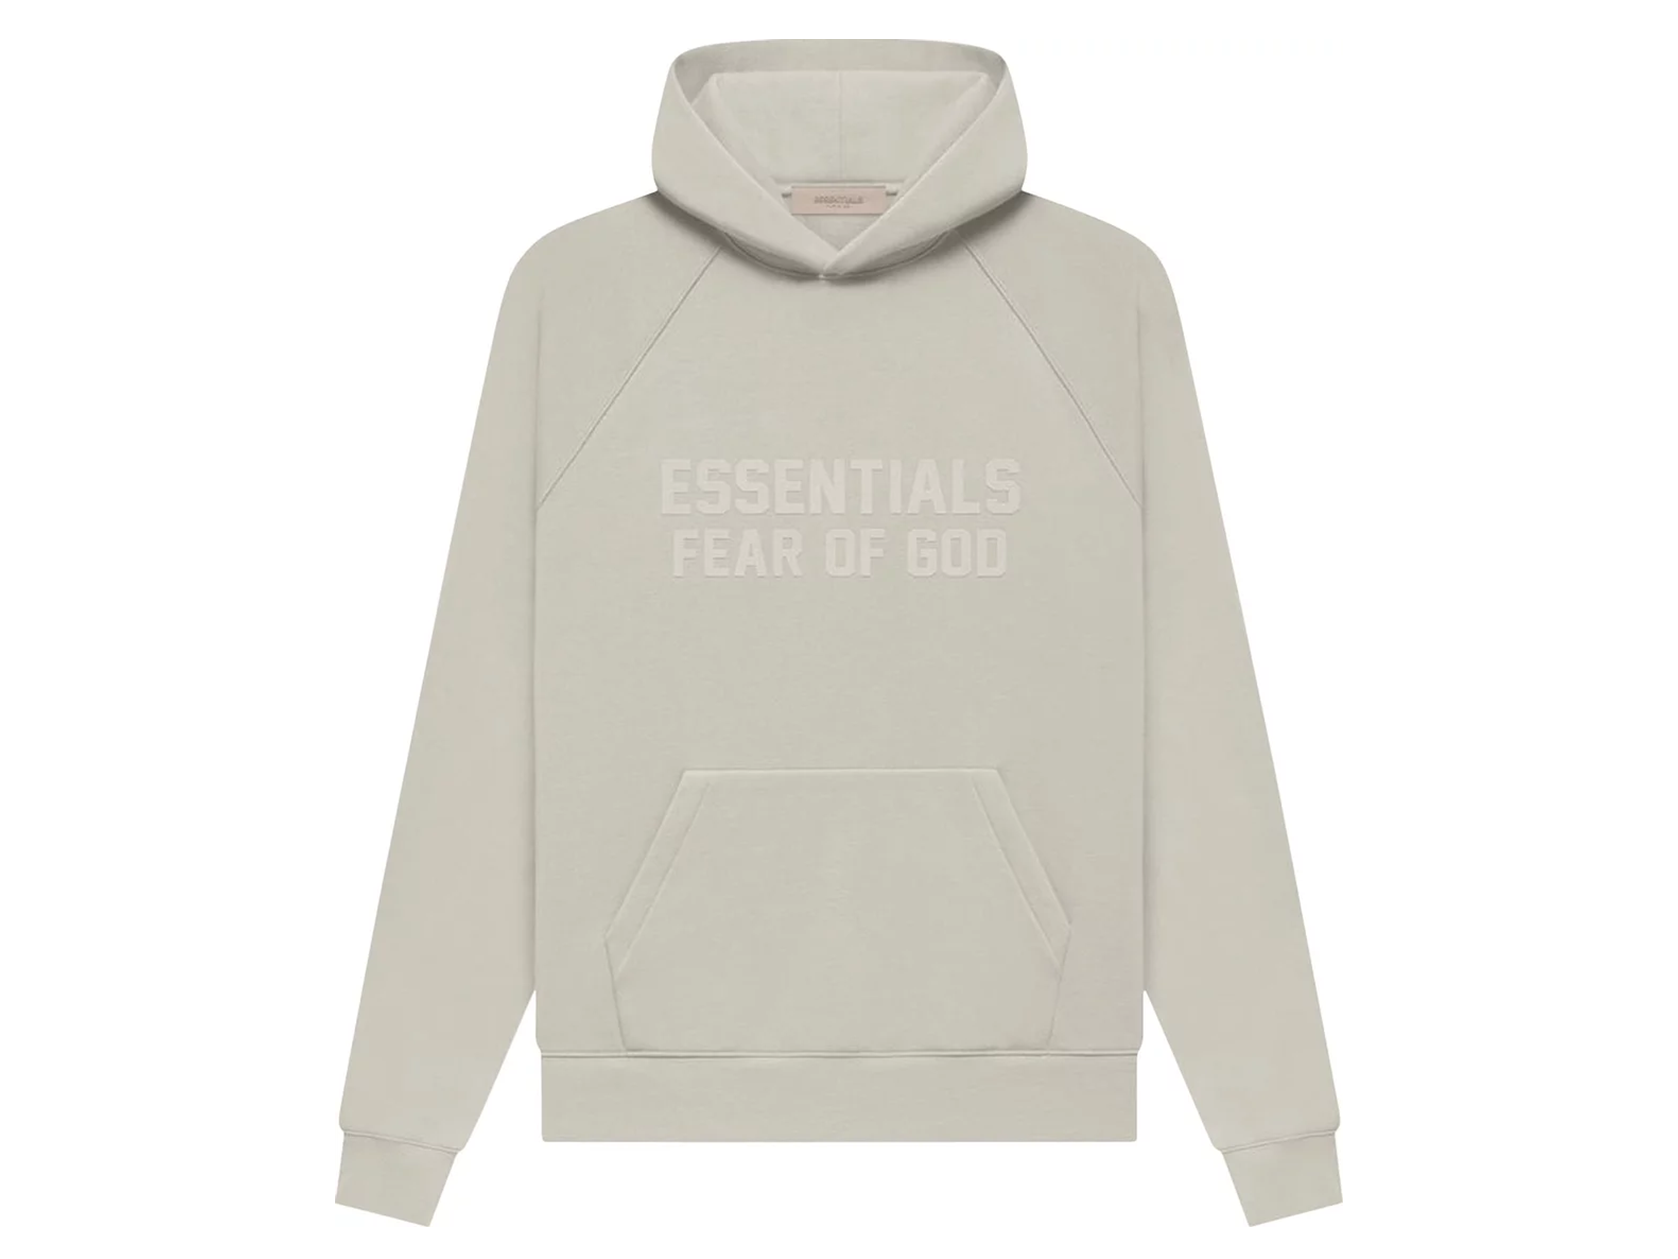 Double Boxed hoodie 139.99 FEAR OF GOD ESSENTIALS SS22 PULLOVER HOODIE SMOKE Double Boxed